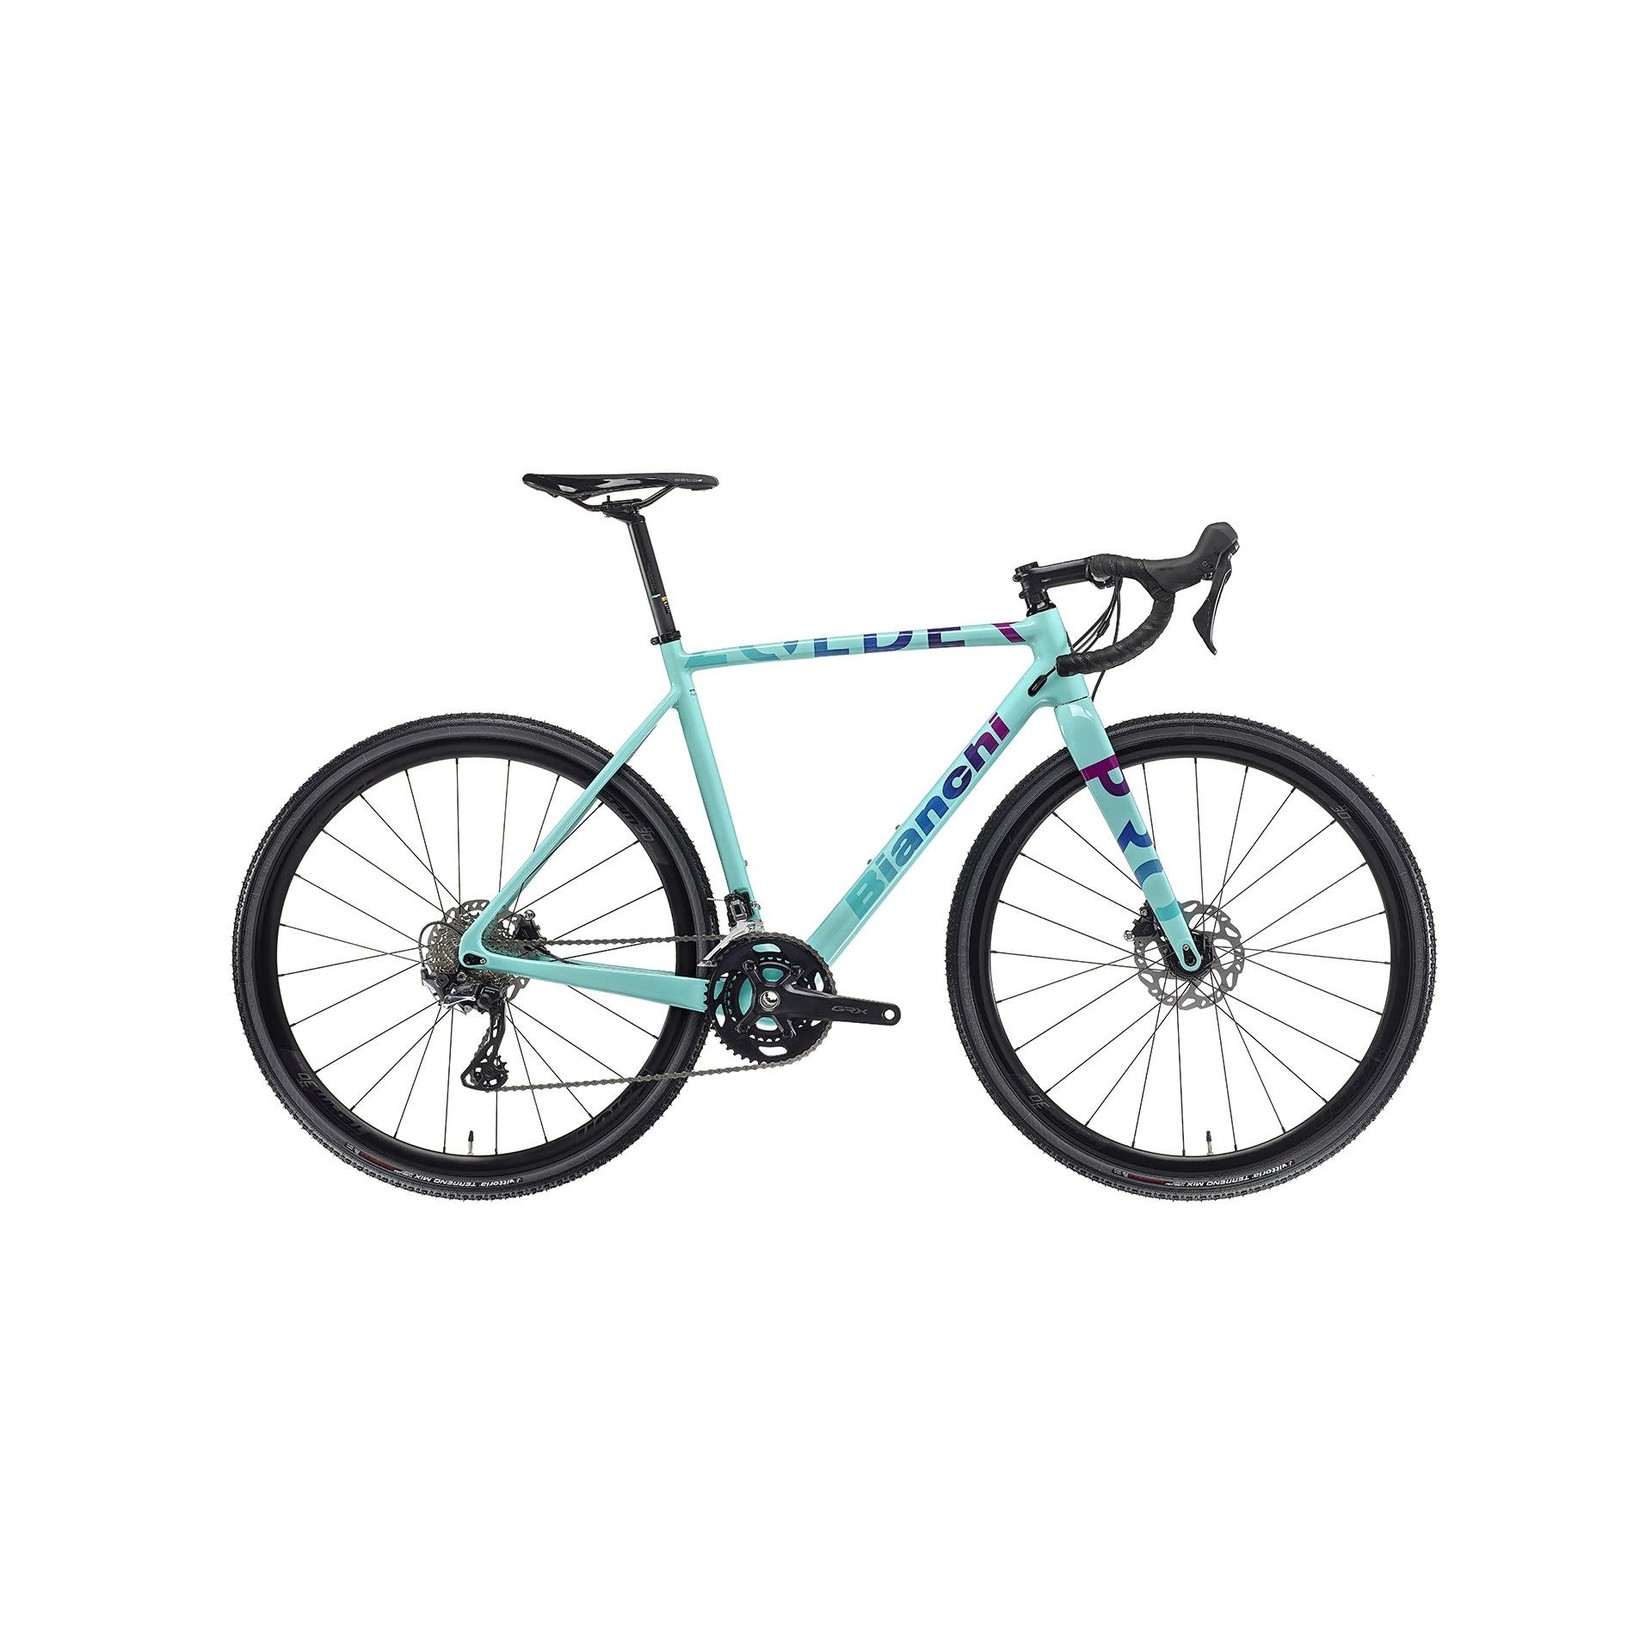 Bianchi Bianchi Zolder Pro CK16 52cm - May delivery